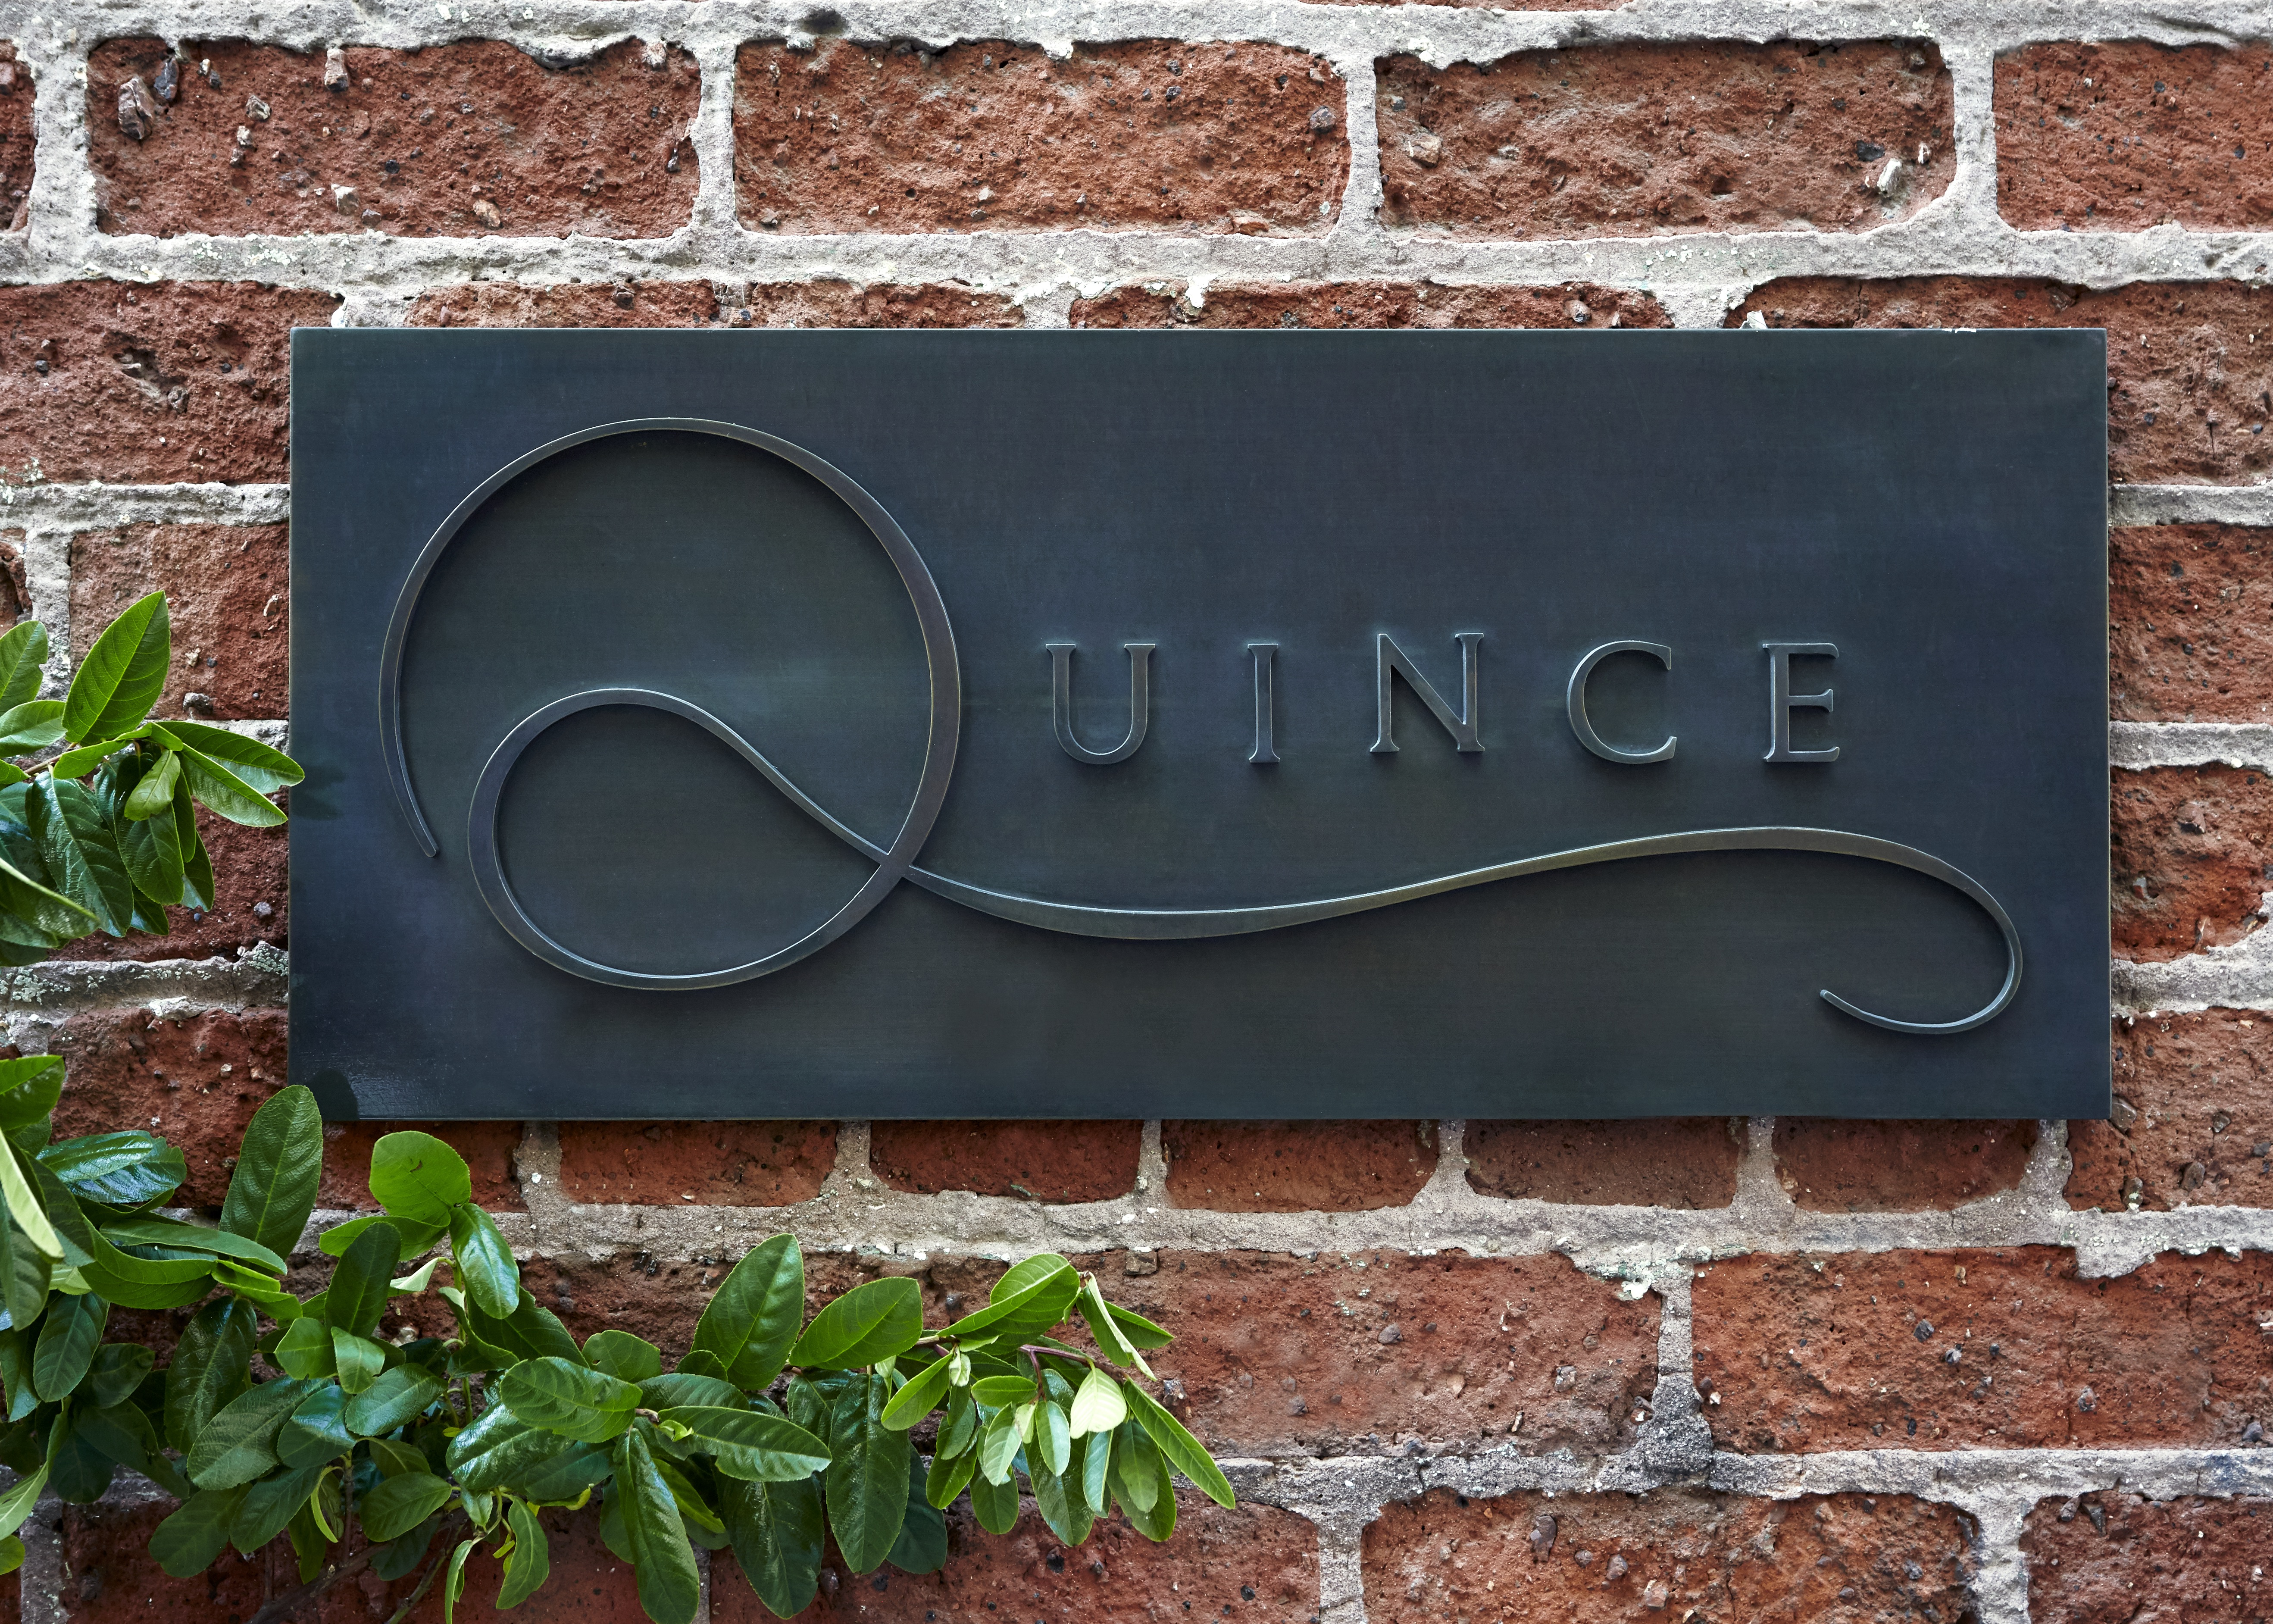 A sign on a brick wall that says “Quince.”